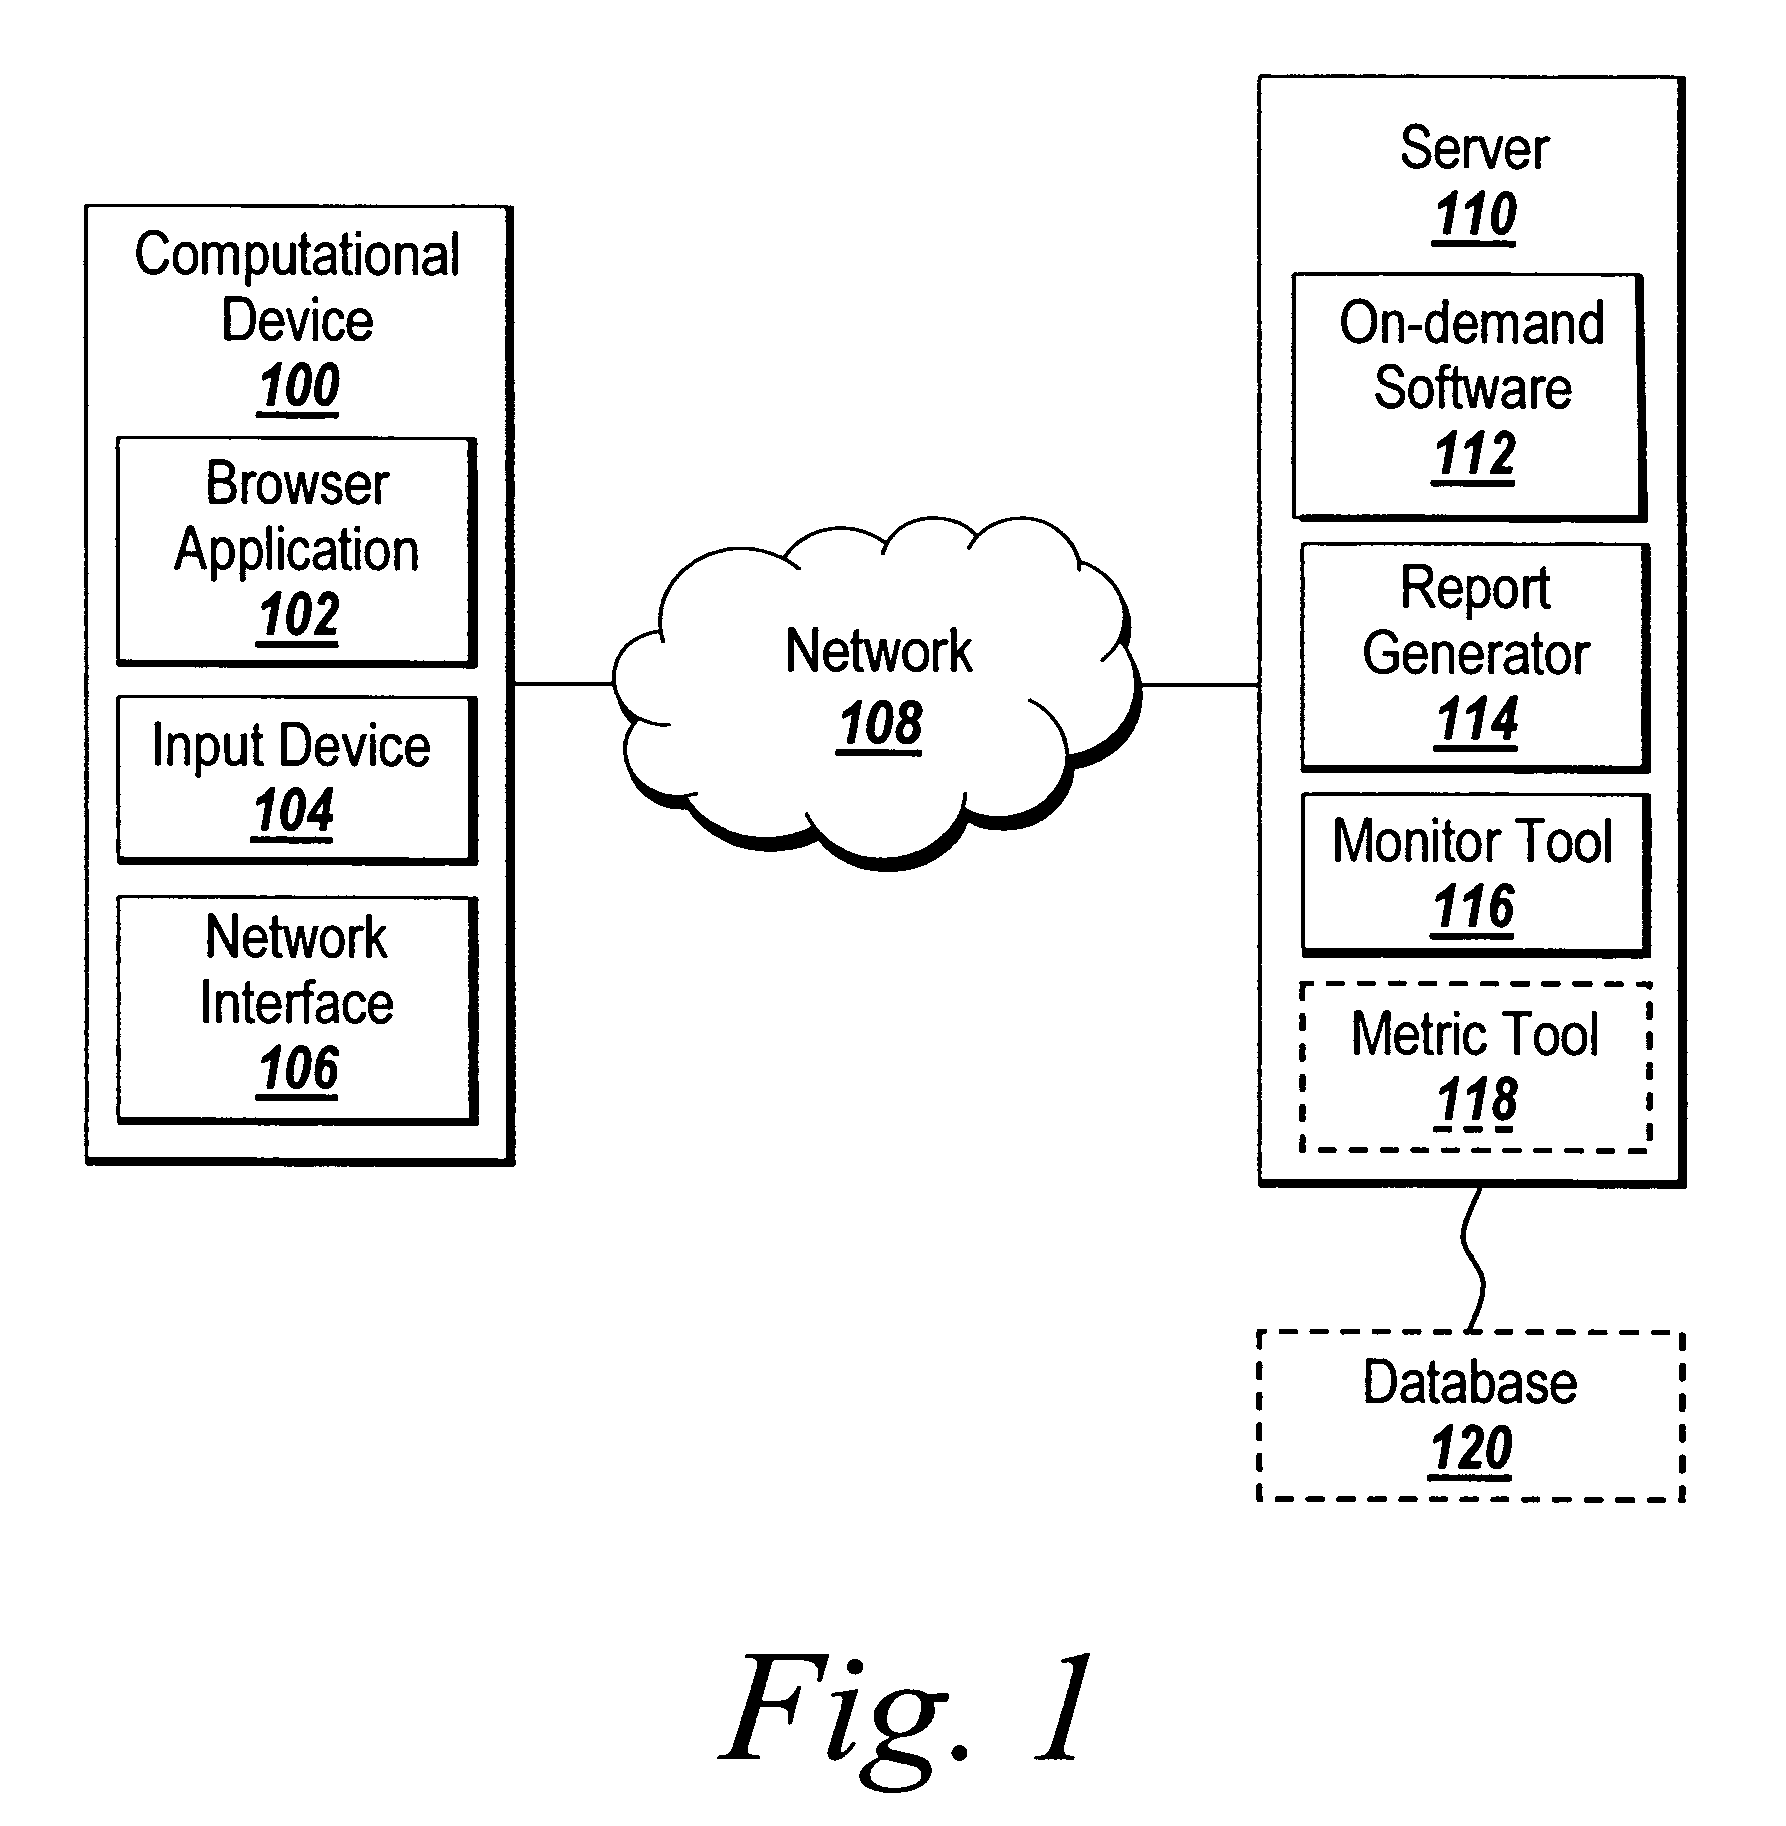 System and method for providing sales leads based on-demand software trial usage